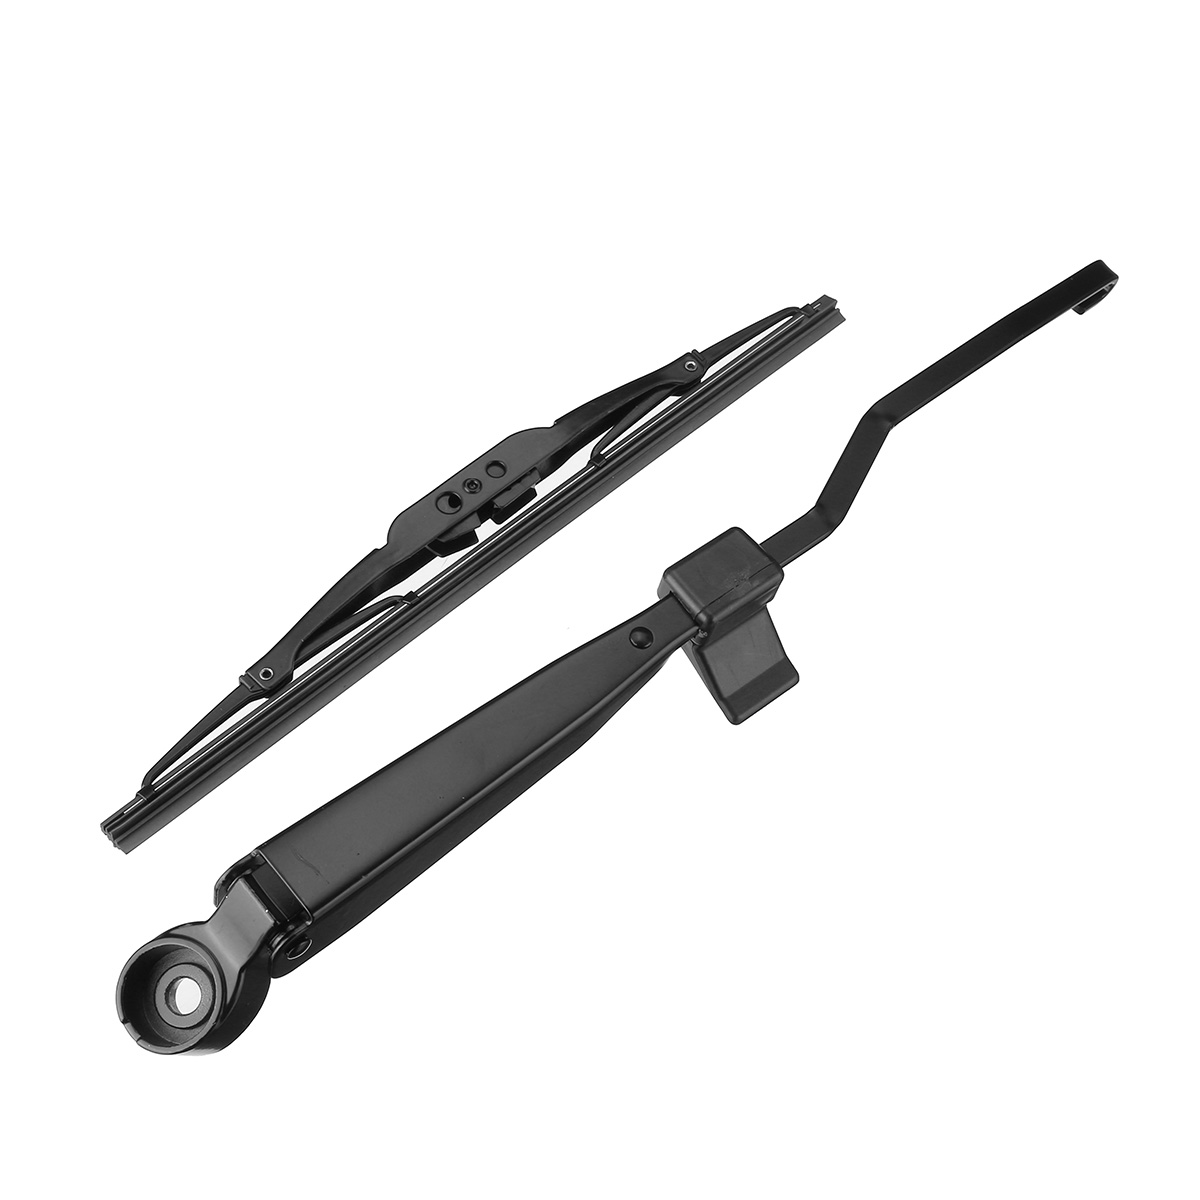 Car rear wiper arm with blade set for jeep grand cherokee 1999-2004 Sale - Banggood.com 1999 Jeep Grand Cherokee Wiper Blade Size